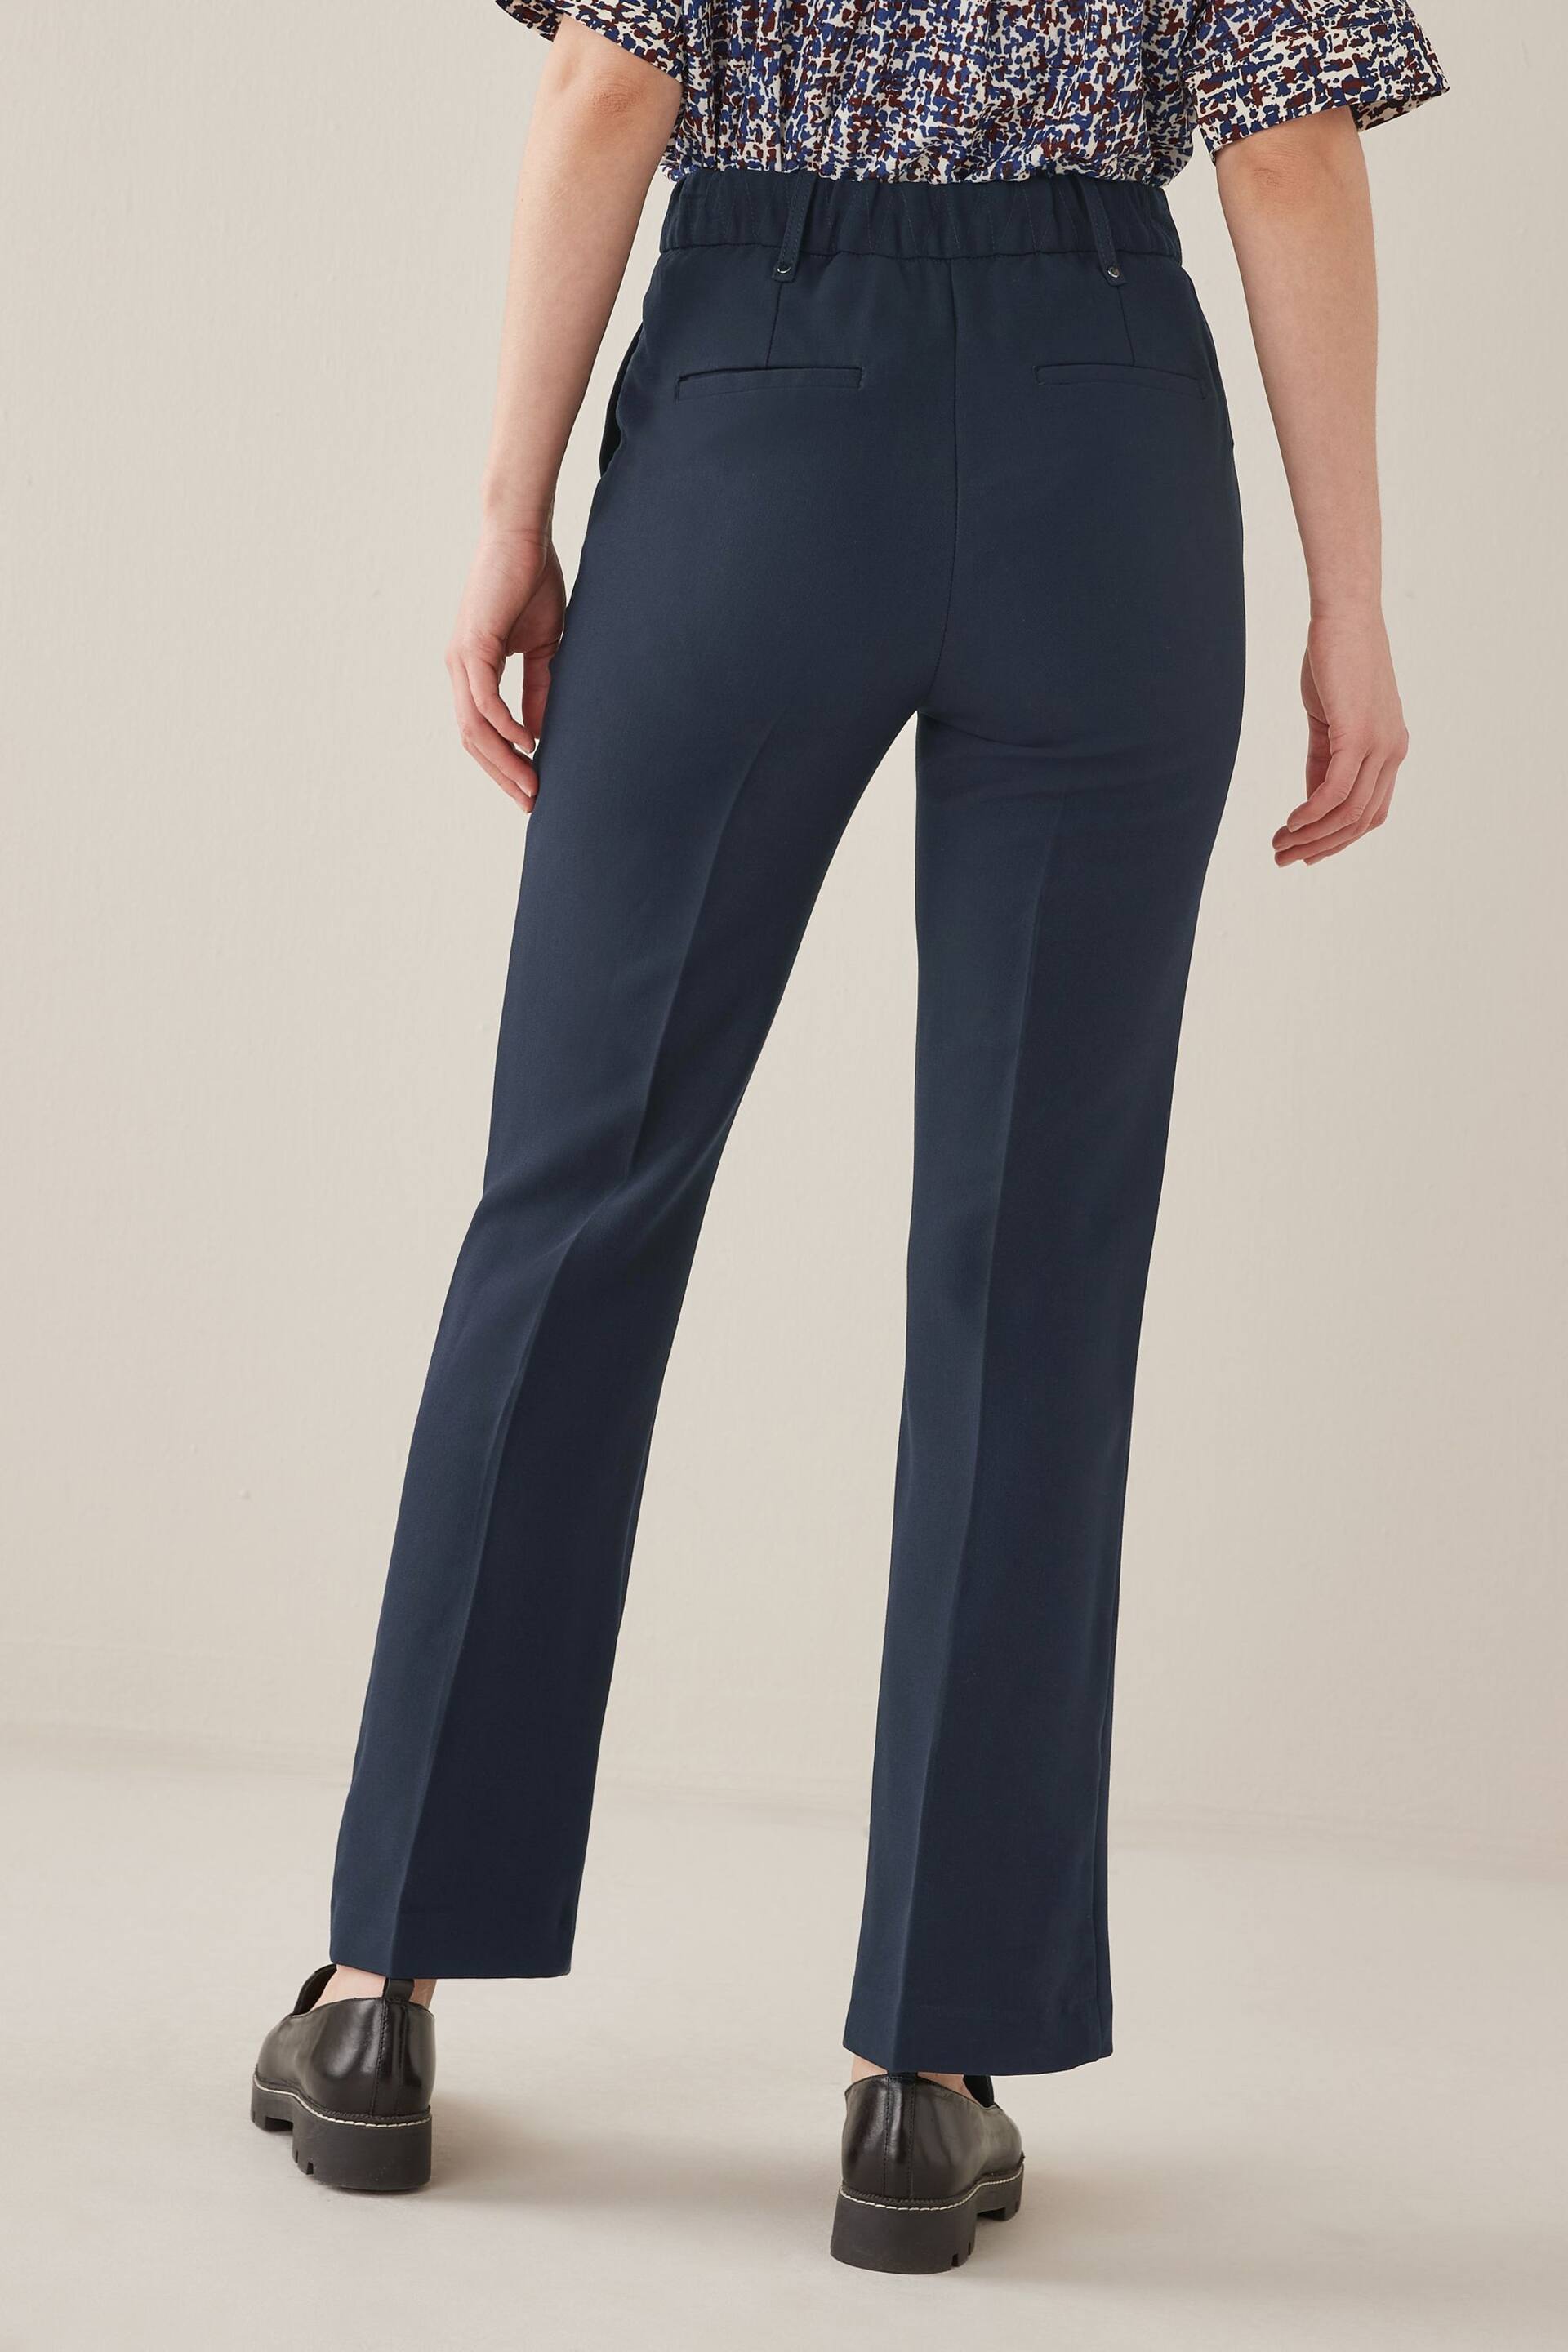 Navy Blue Tailored Elasticated Back Boot Cut Trousers - Image 2 of 5